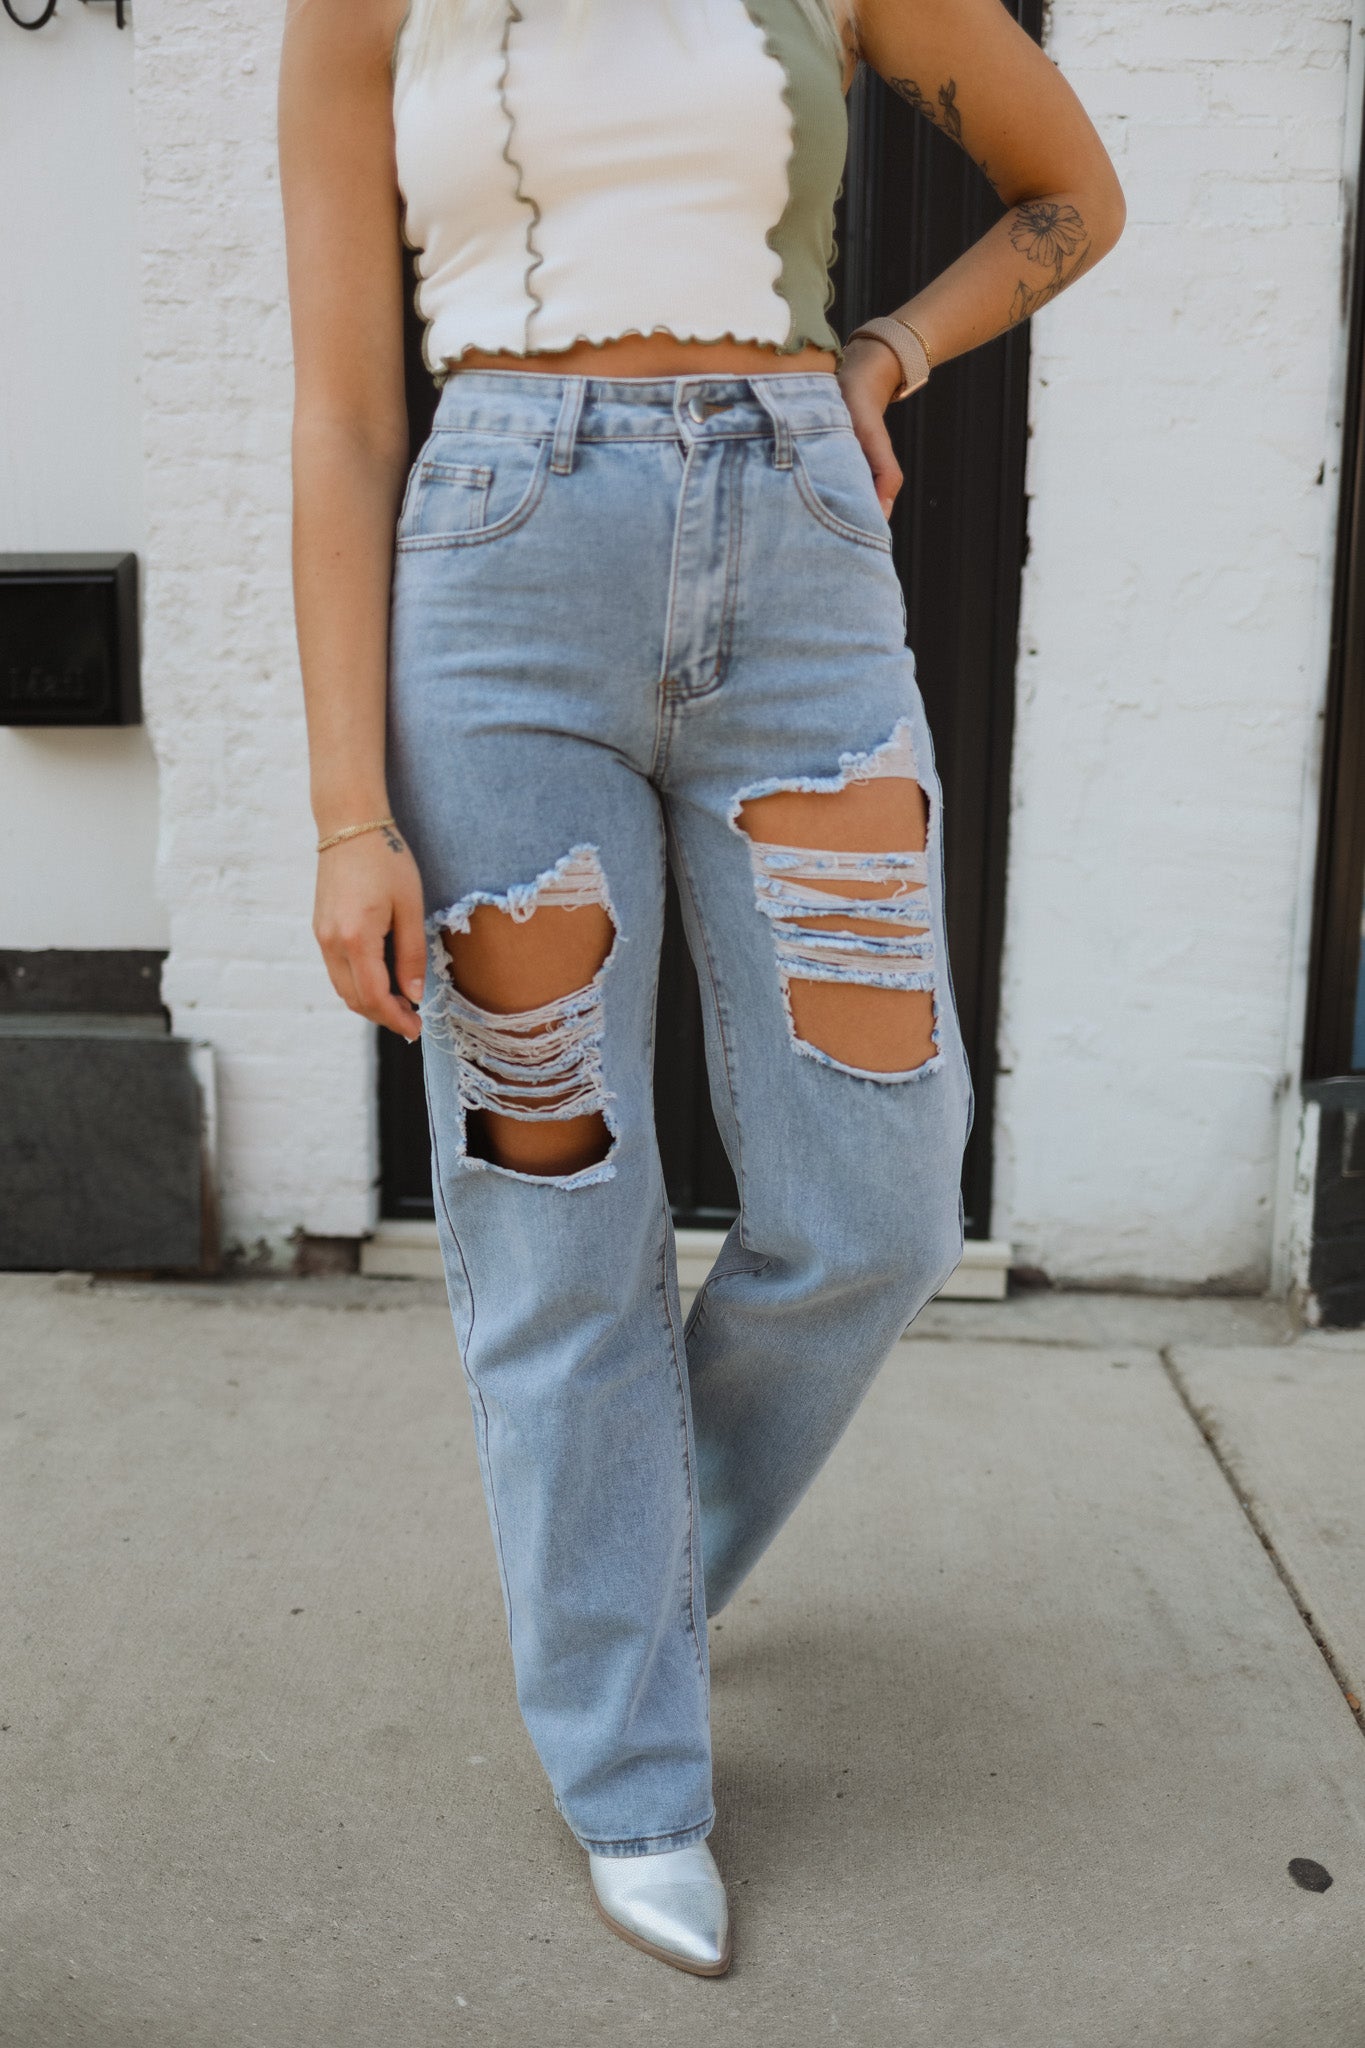 Fashion-forward design features a high-waisted silhouette, straight leg, distressed details, and ripped holes for an acid-washed, overdyed look in a boyfriend-mom jean.